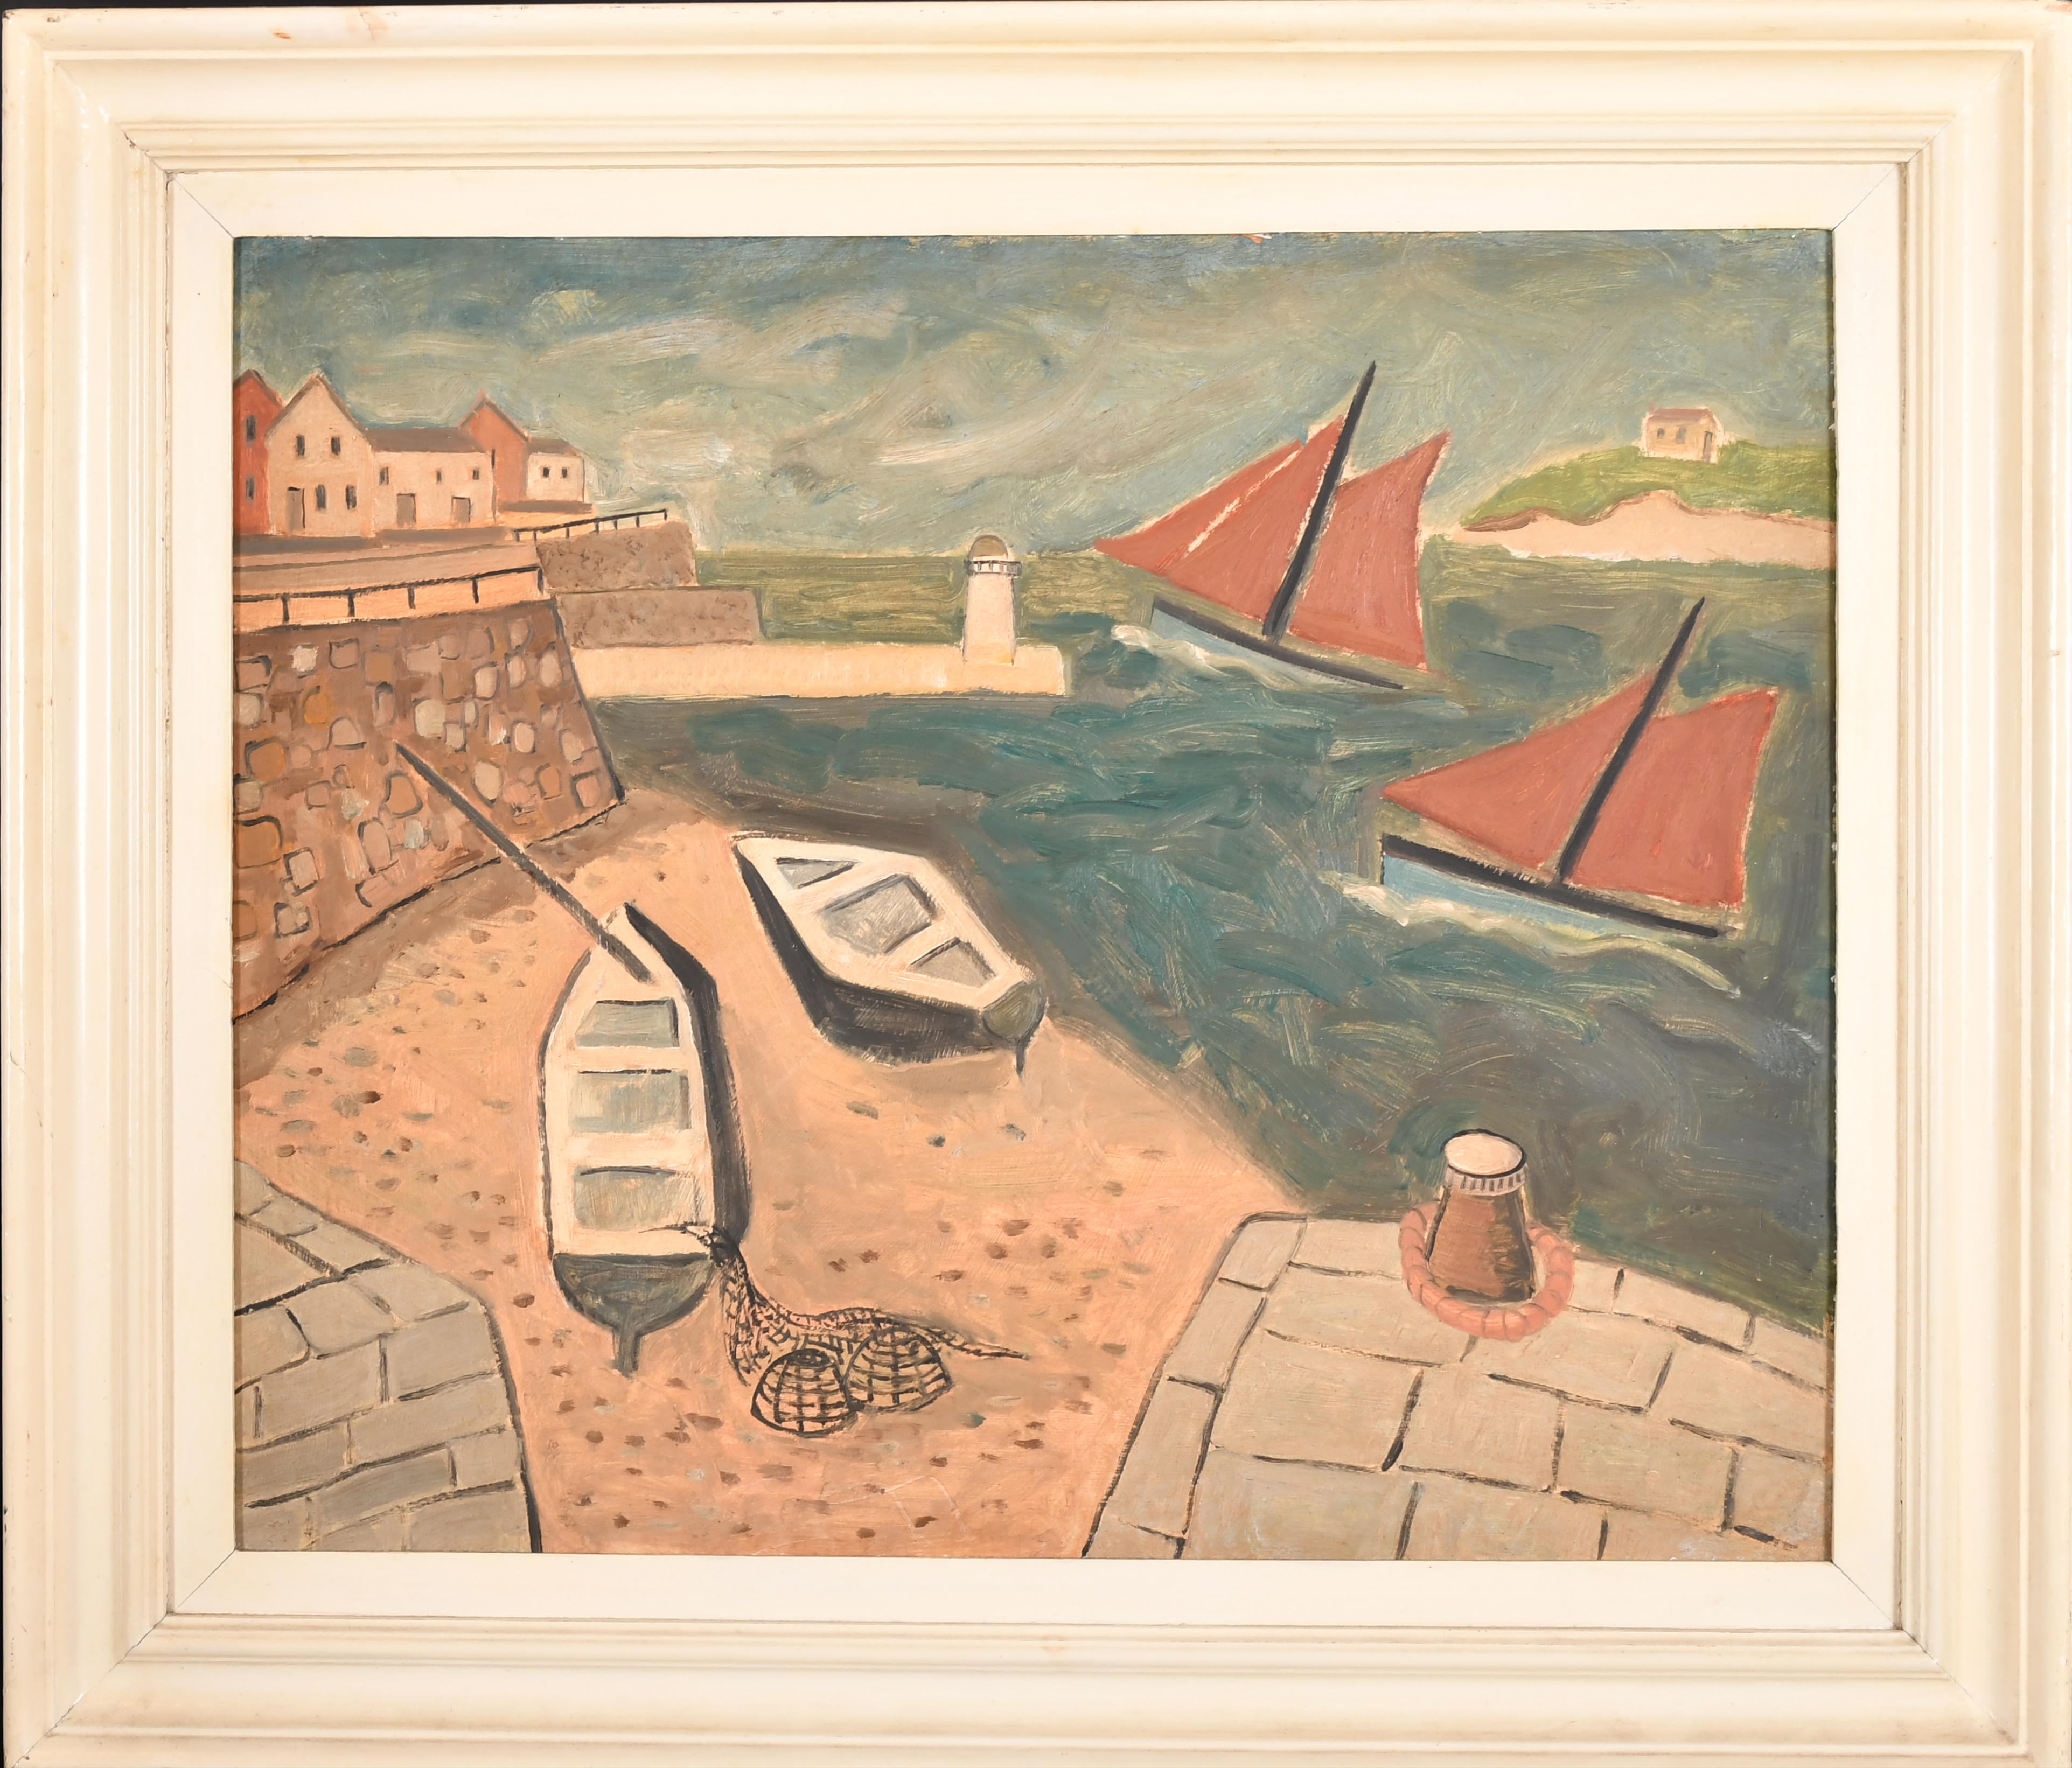 20th Century English School. A Harbour Scene with Shipping, Oil on board, 20" x 24" (50.8 x 61cm) - Image 2 of 3